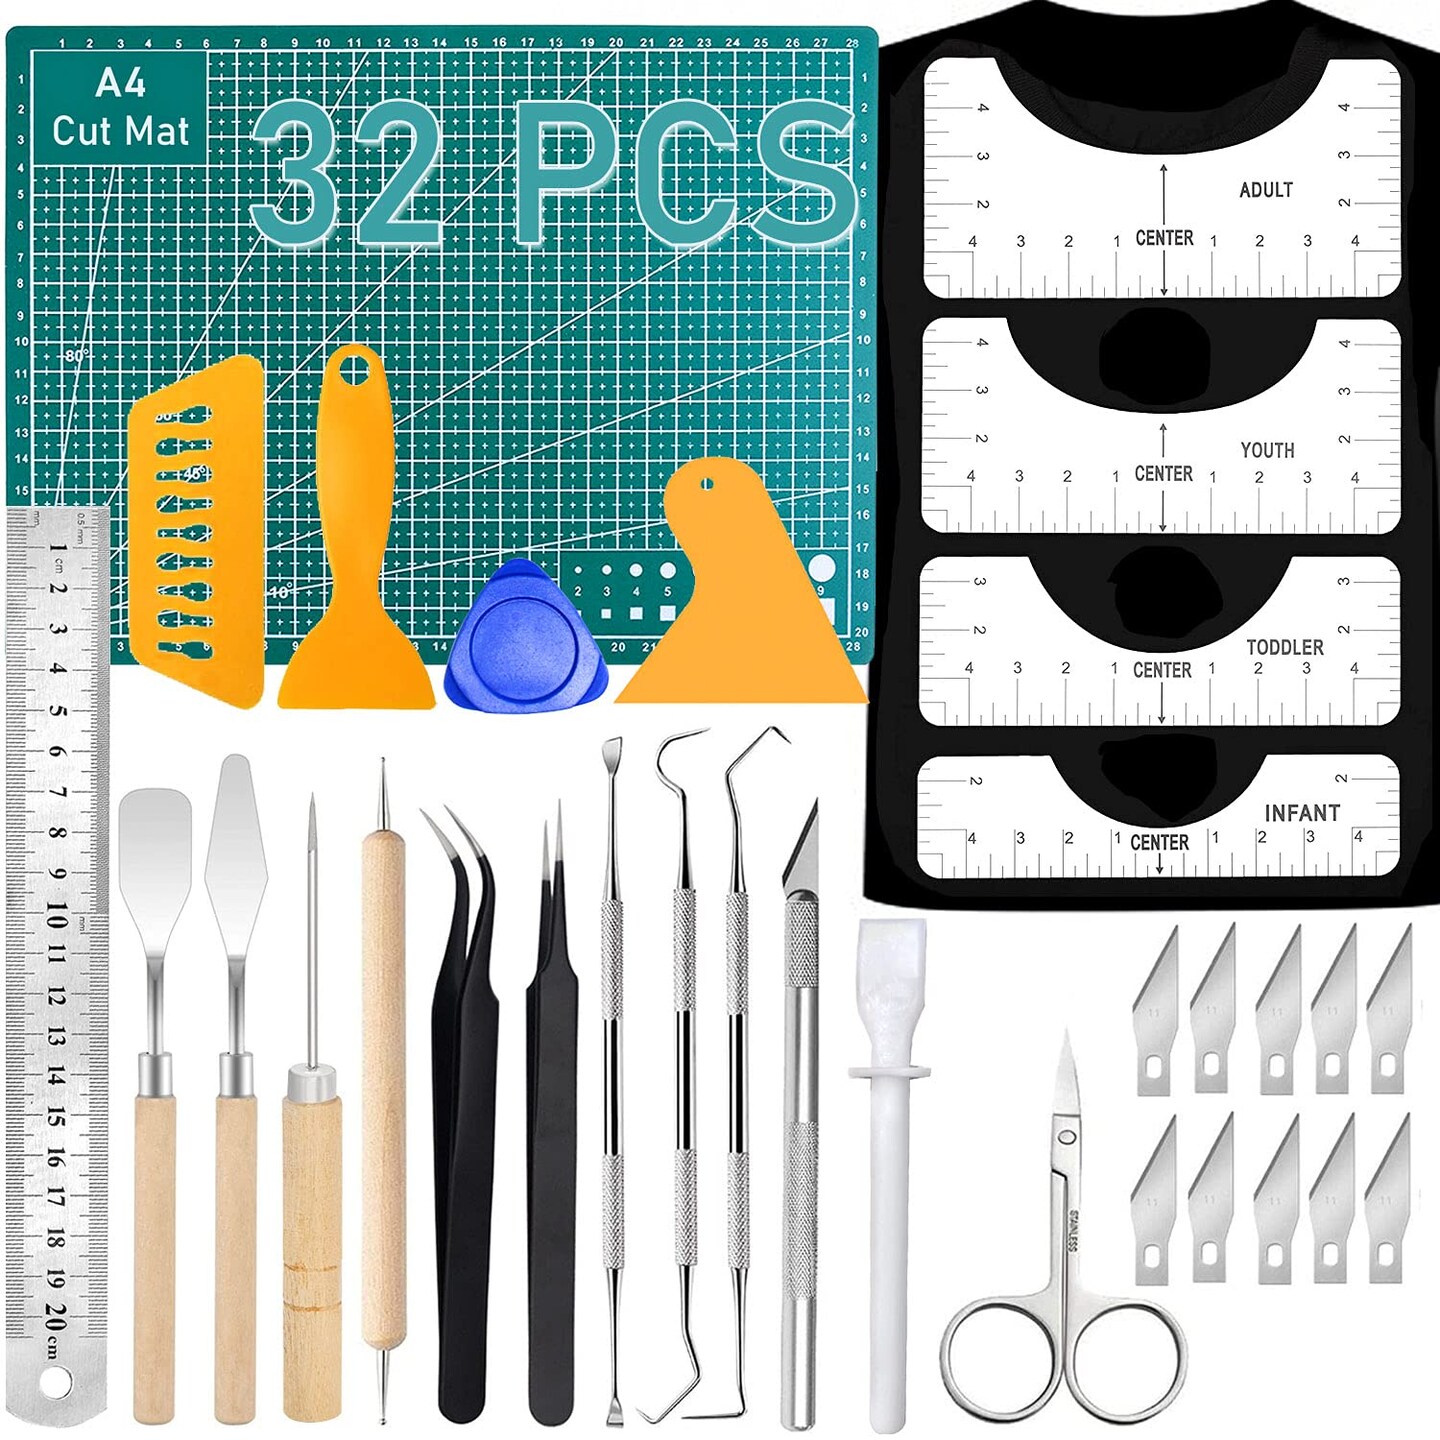 32Pack Vinyl Weeding Tools with T-Shirt Alignment Ruler Kit, Weeding Tools for Vinyl, Vinyl Weeding Tools Kit for Weeding Vinyl, DIY Art &#x26; Craft, Silhouettes, Cameos, Cutting, Scrapbook